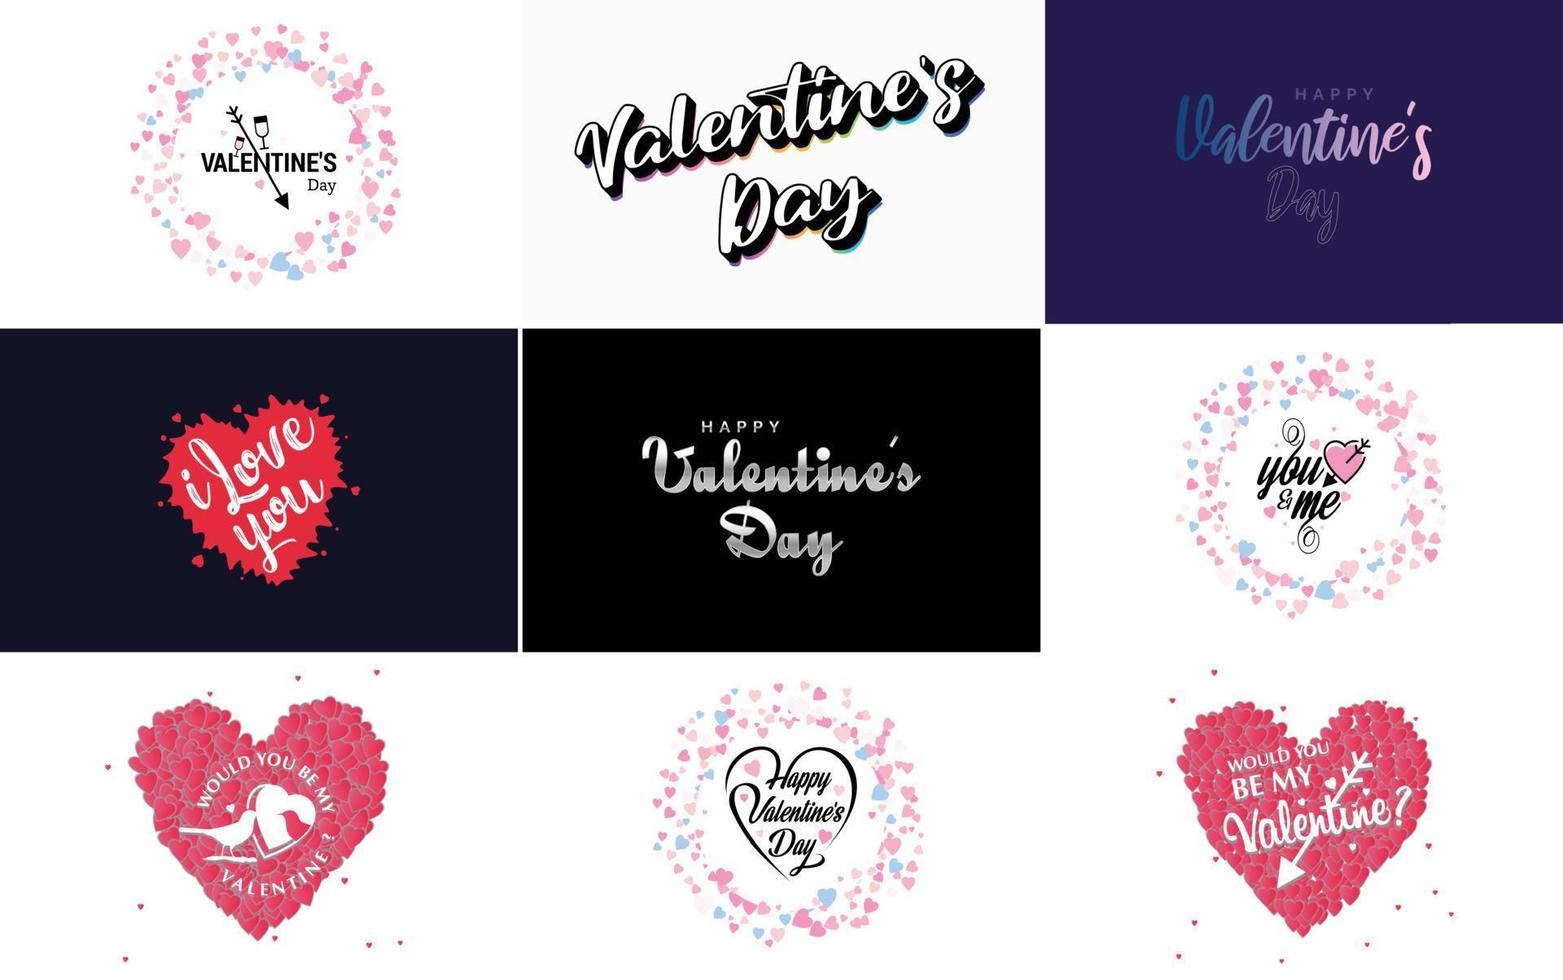 Valentine's lettering with a heart design suitable for use in Valentine's Day cards and invitations vector